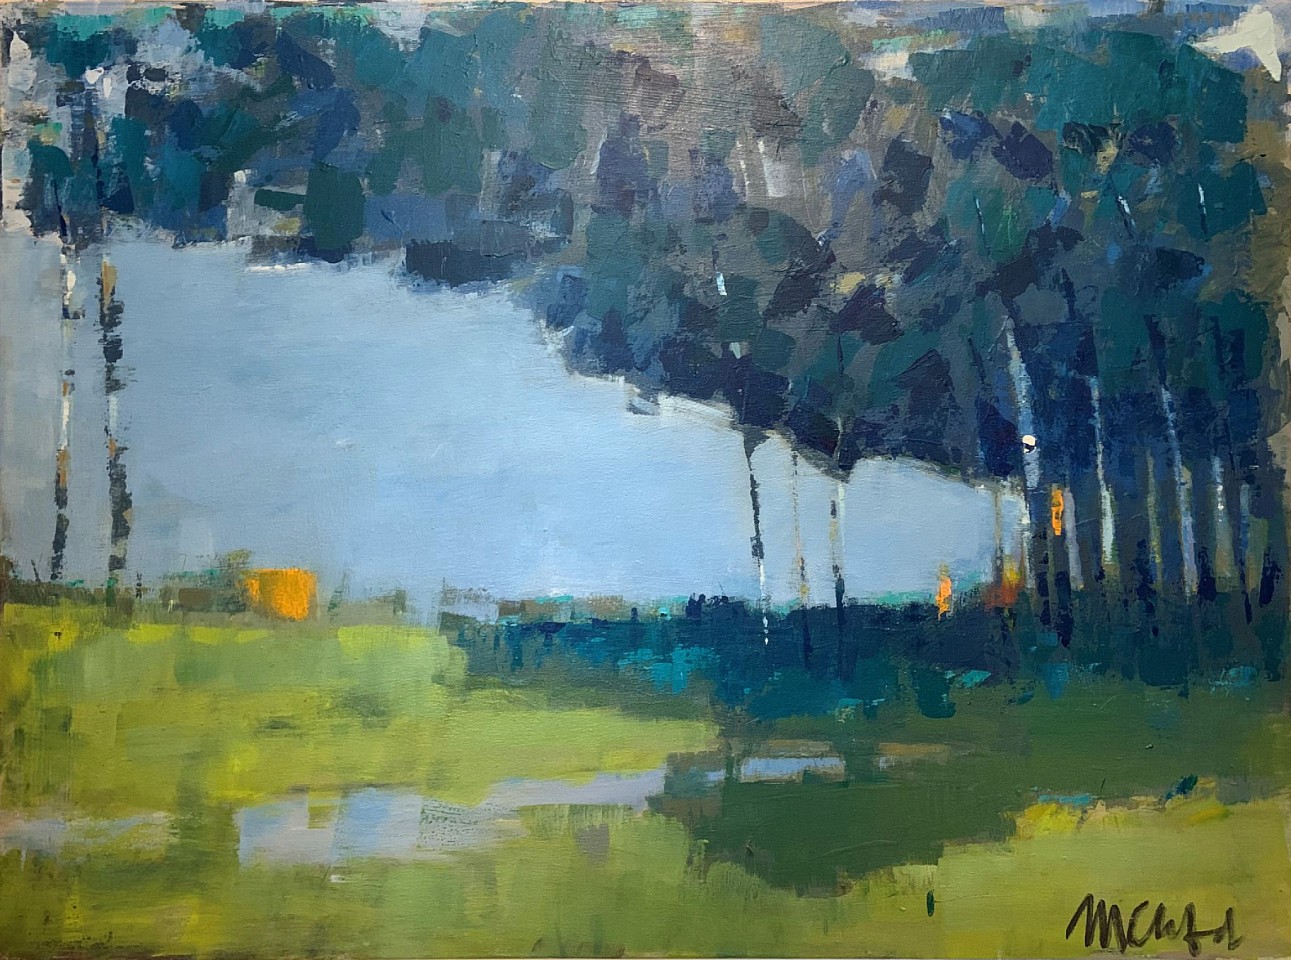 Maureen Chatfield, Tree Shadow
mixed media on canvas, 36 x 48 in. (91.4 x 121.9 cm)
MChat230701